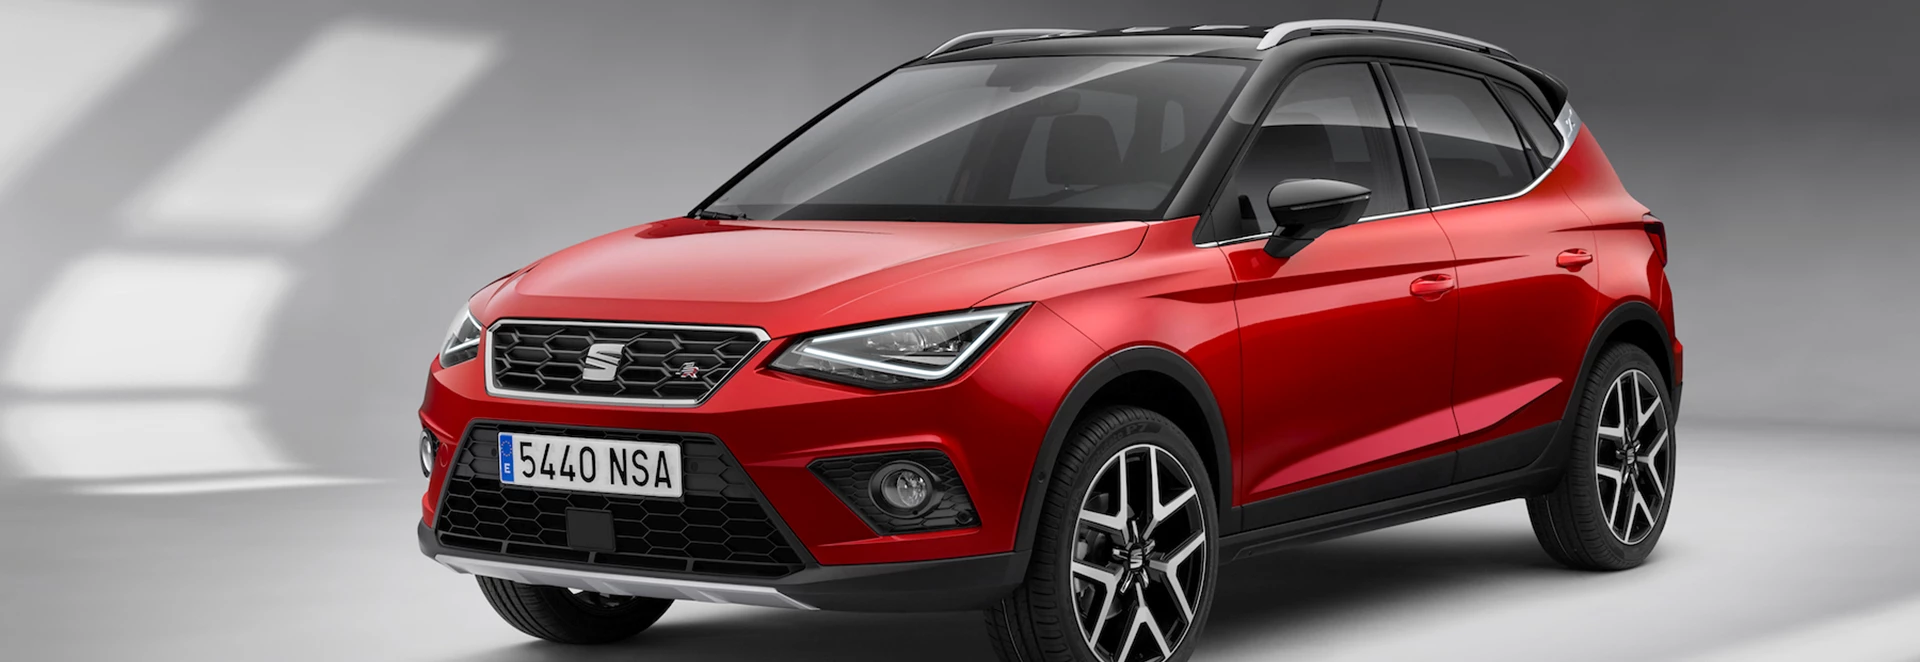 Seat reveals prices and trims for Arona SUV 